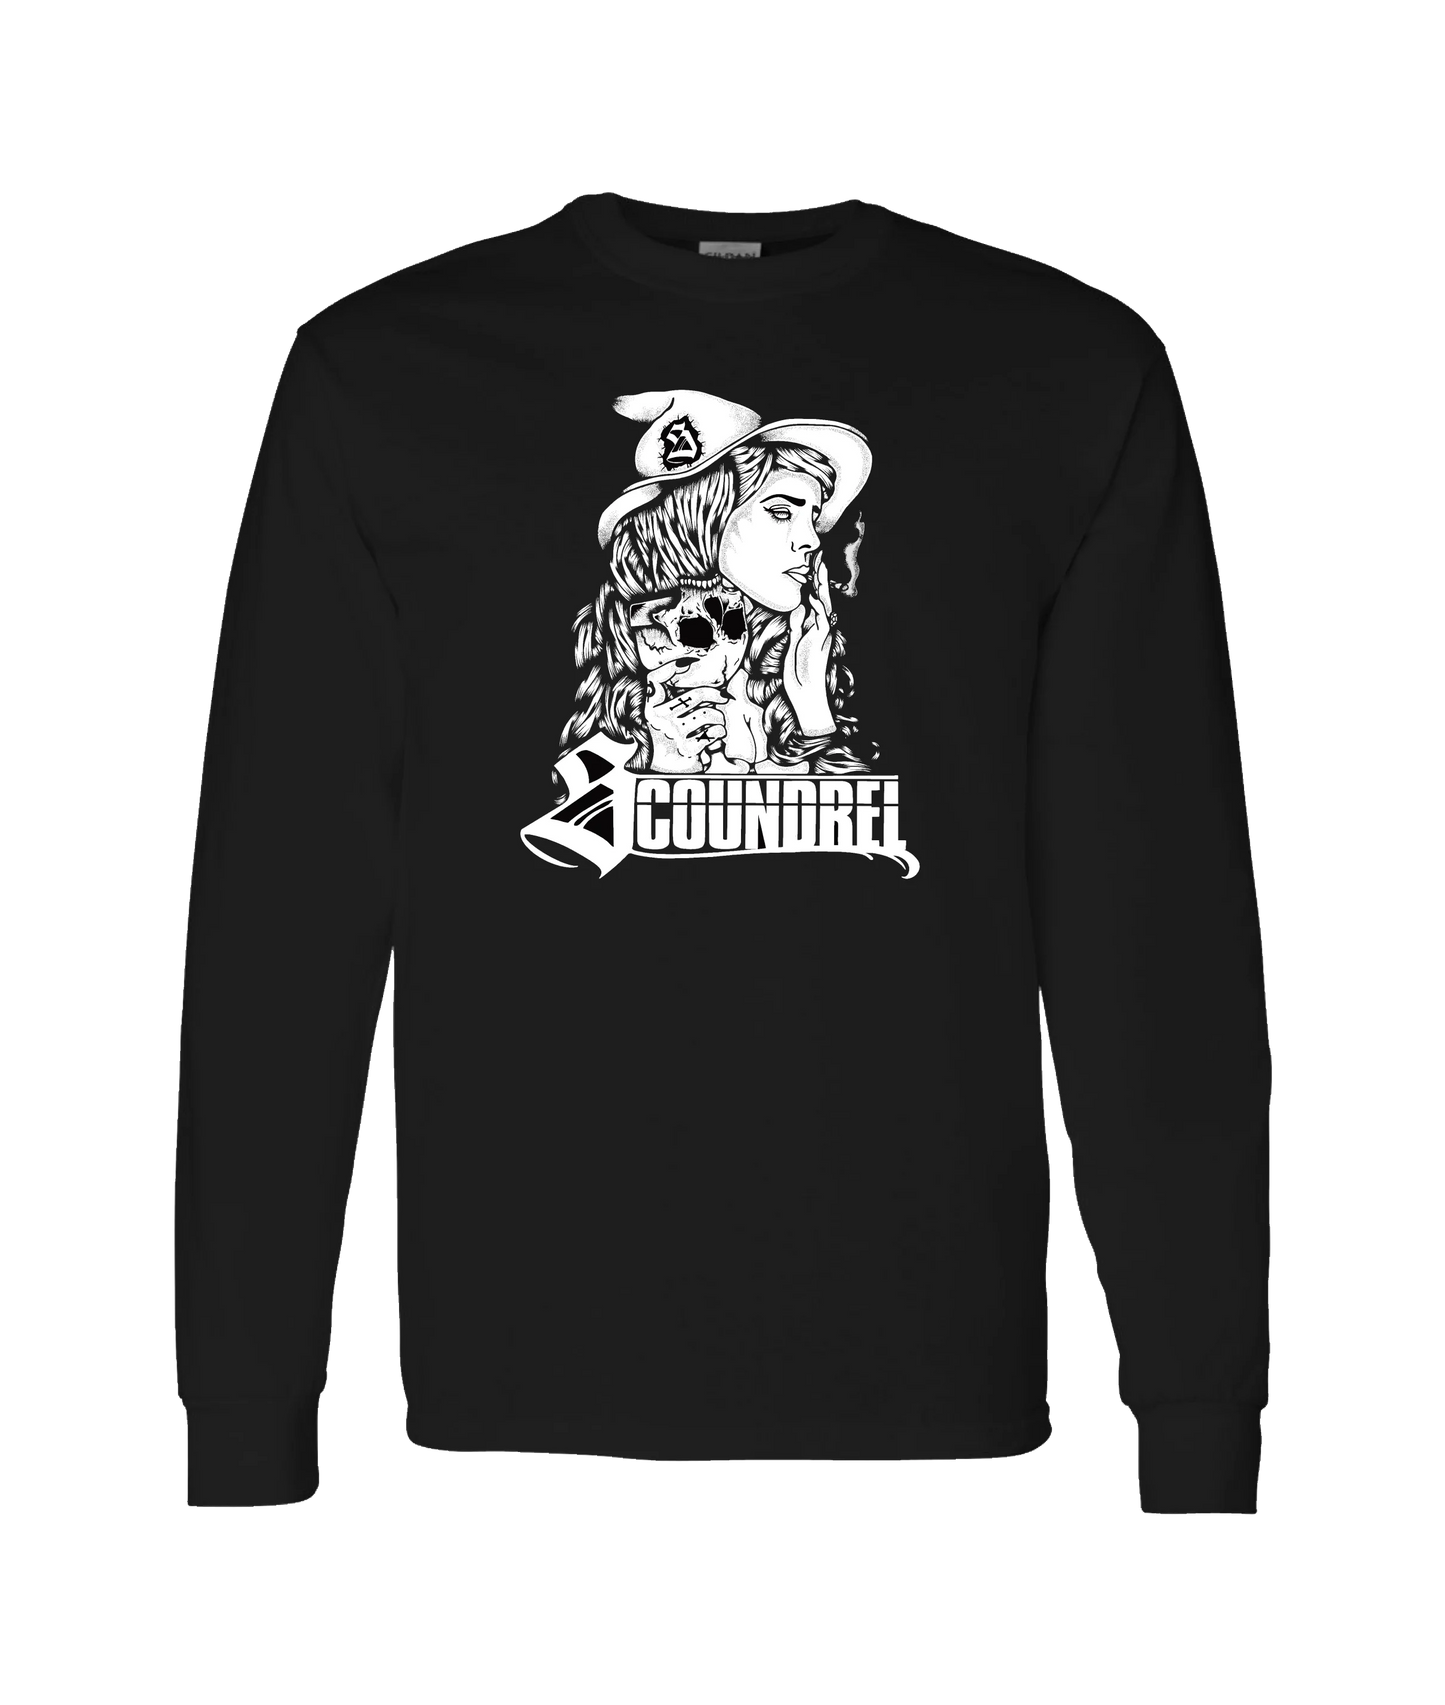 Scoundrel - Witch - Black Long Sleeve T